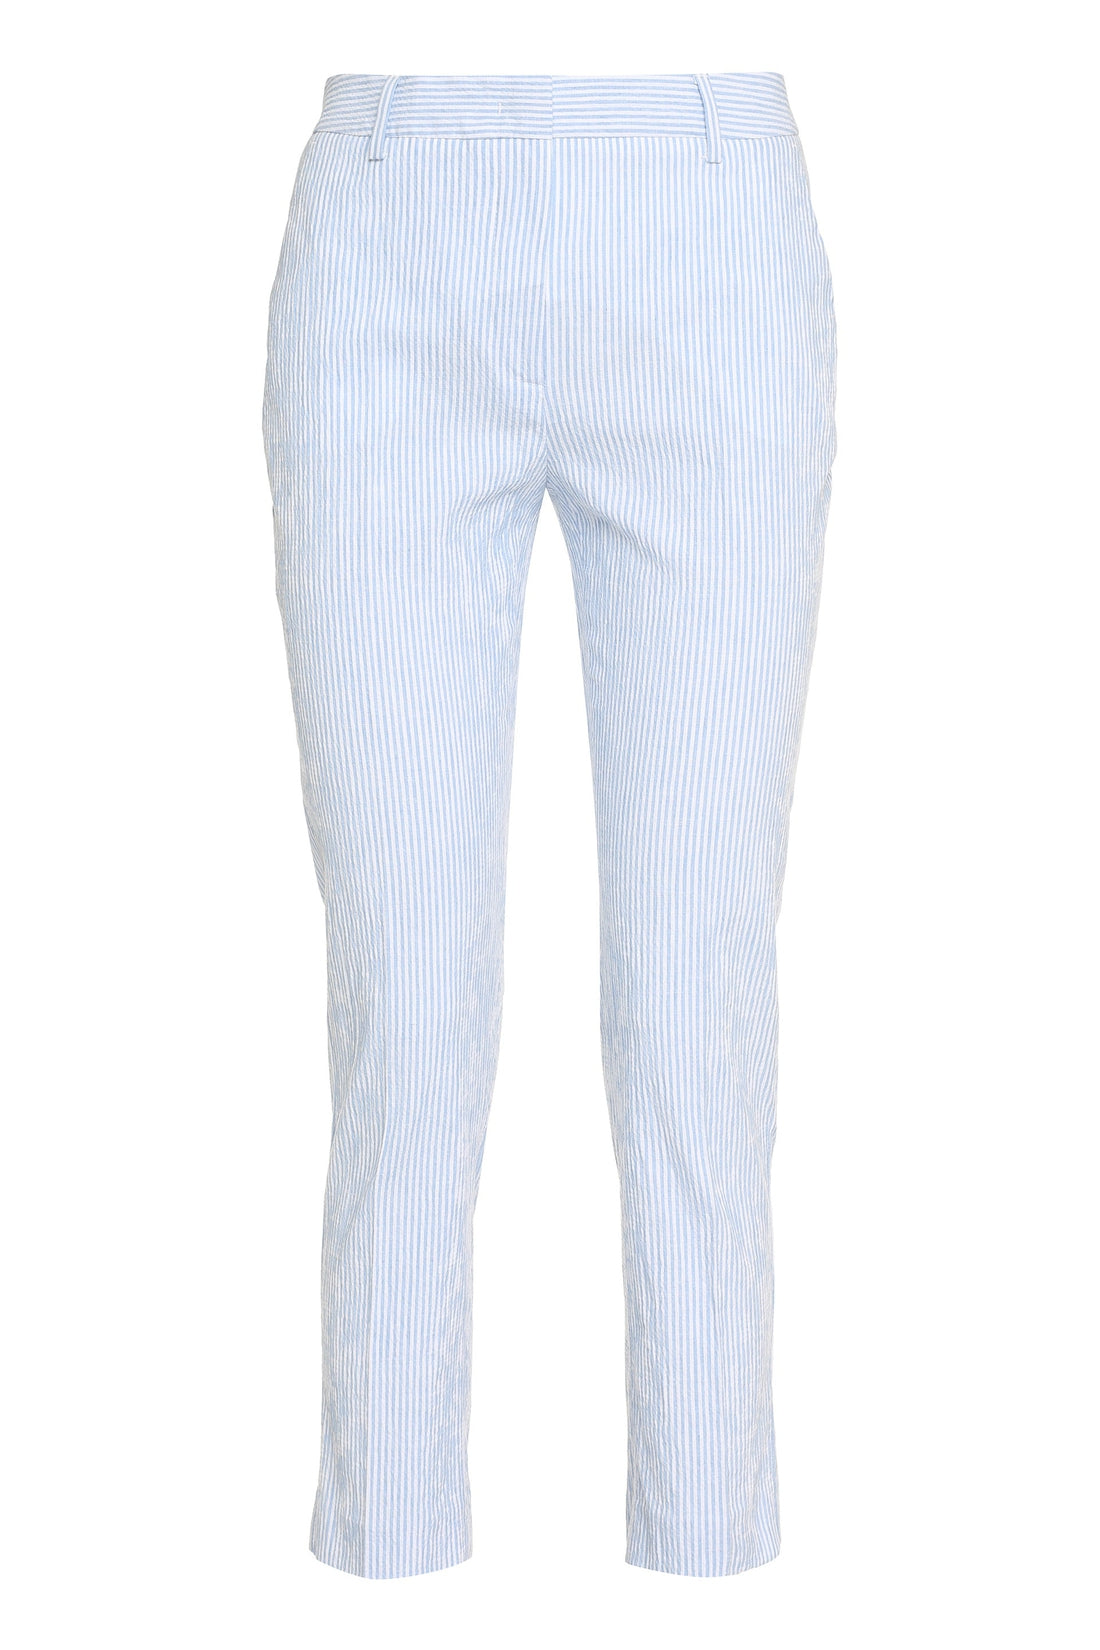 Weekend Max Mara-OUTLET-SALE-Starlet trousers in cotton and linen-ARCHIVIST